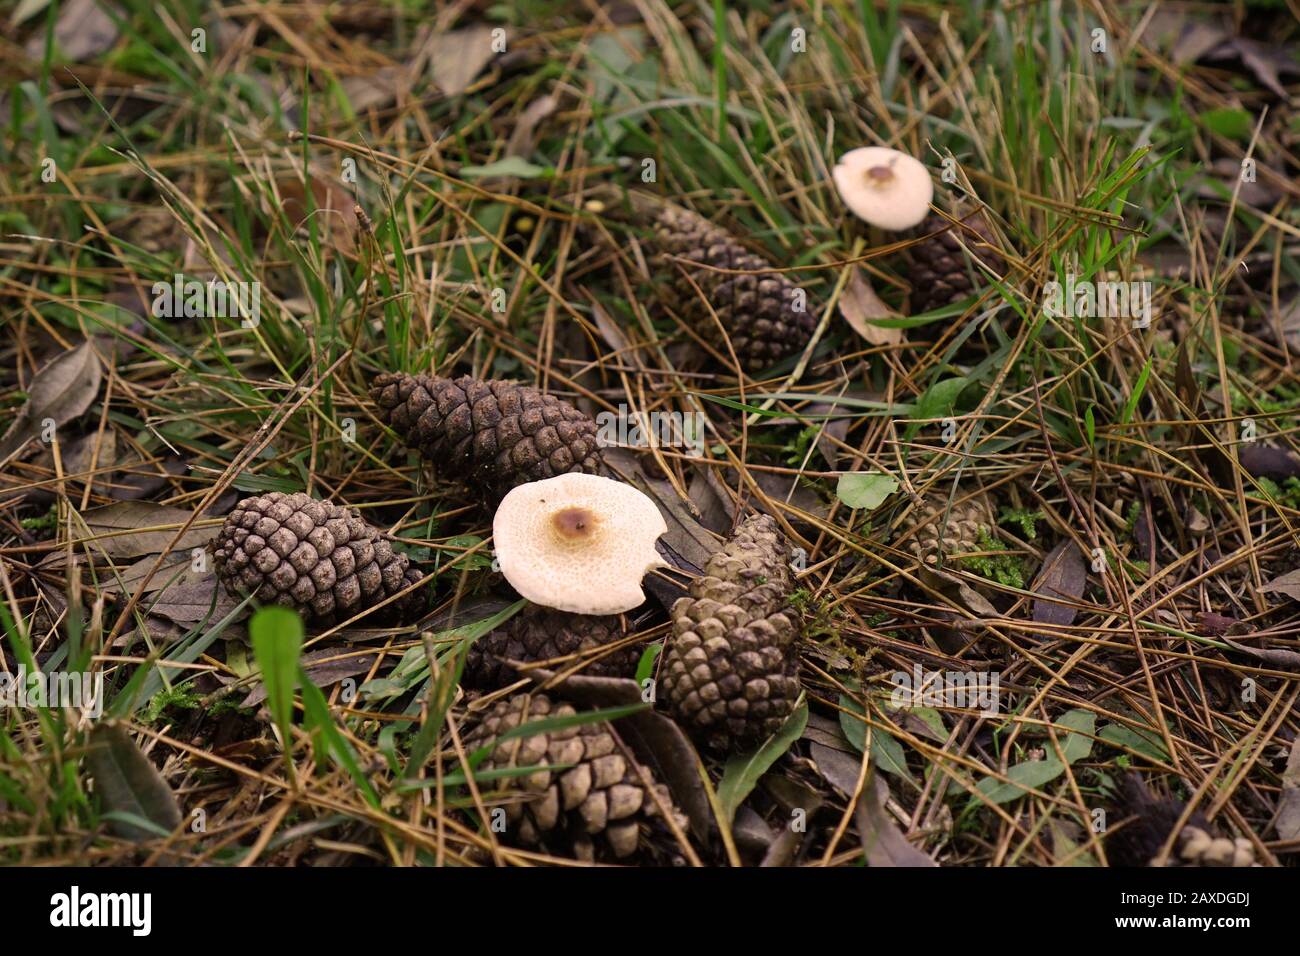 Wild growing mushrooms amongst pine cones and pine needles fallen on the forest floor Stock Photo